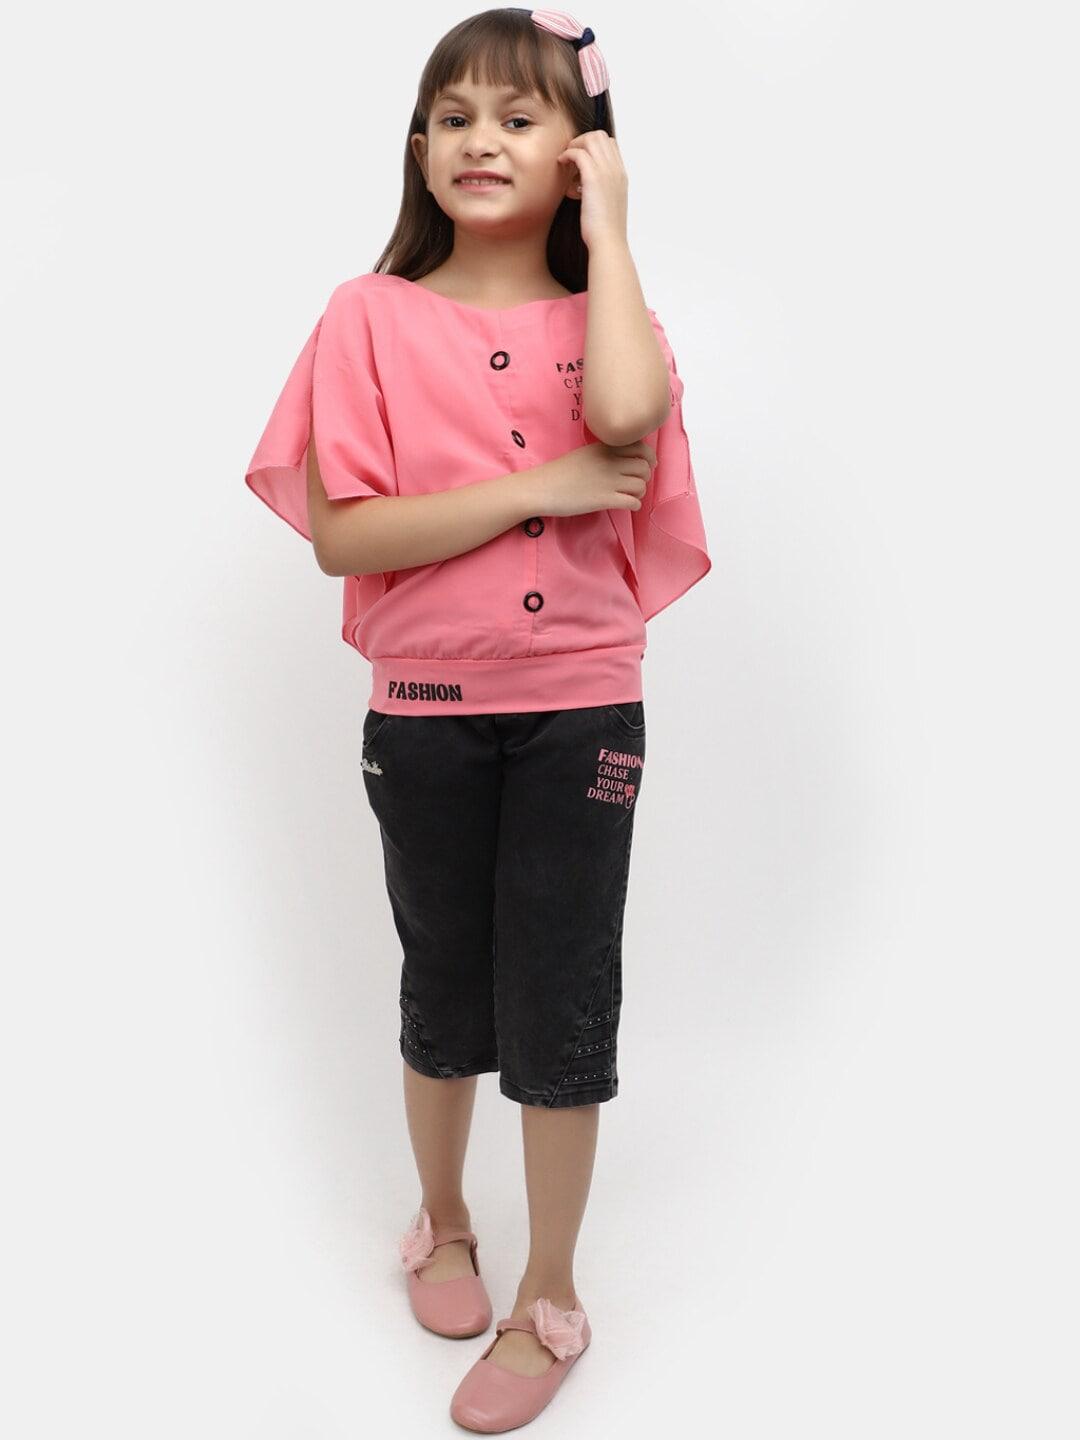 v-mart-girls-printed-pure-cotton-top-with-shorts